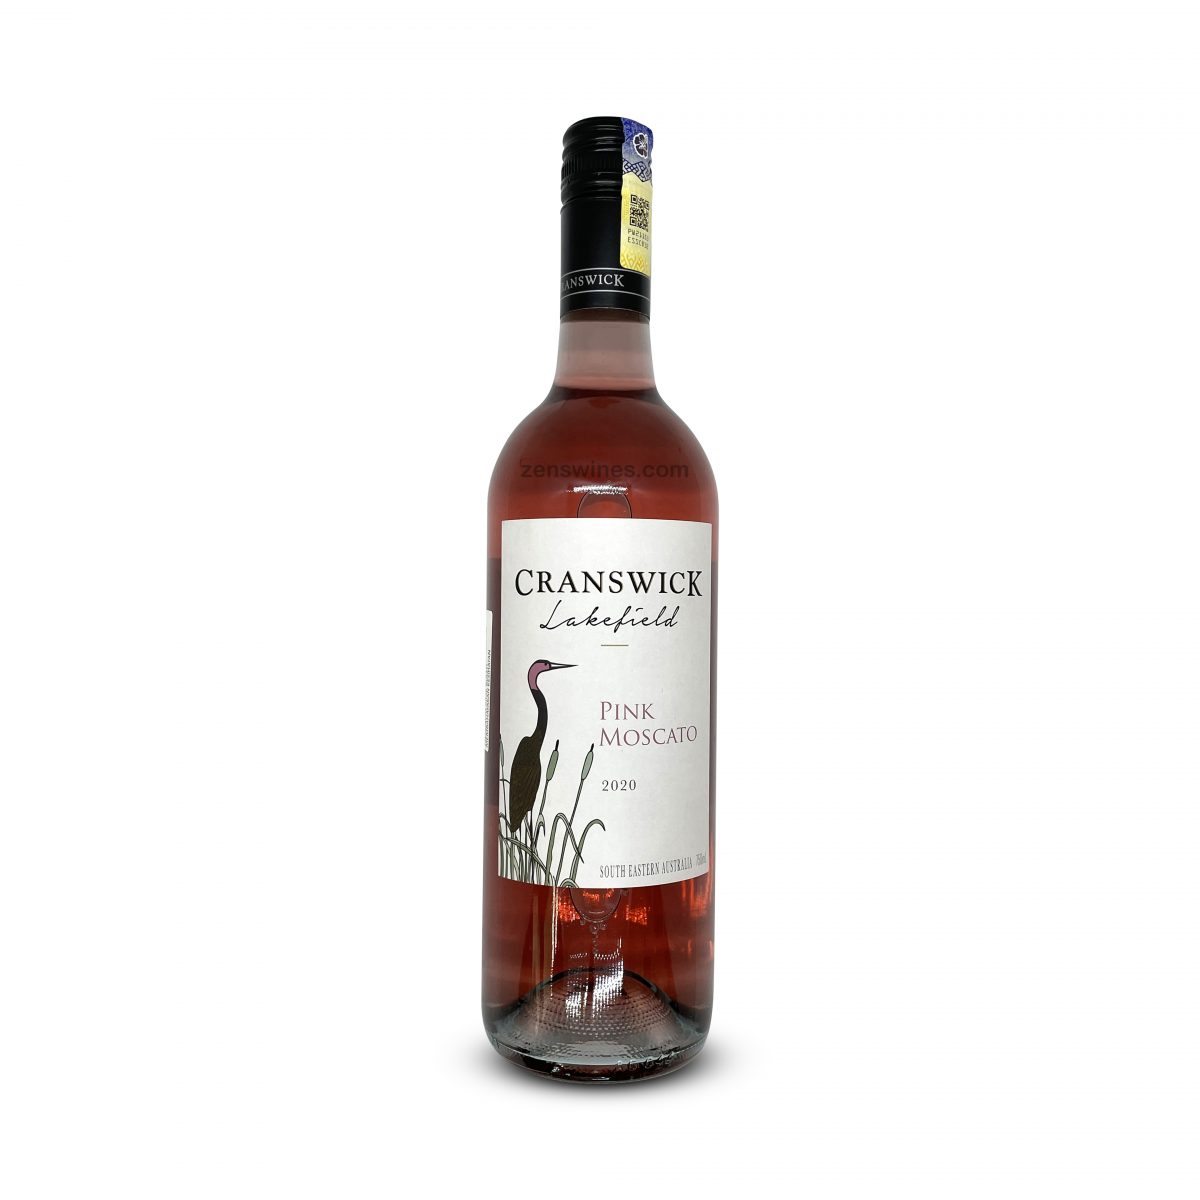 CRANSWICK LAKEFIELD PINK MOSCATO 2019 RM59